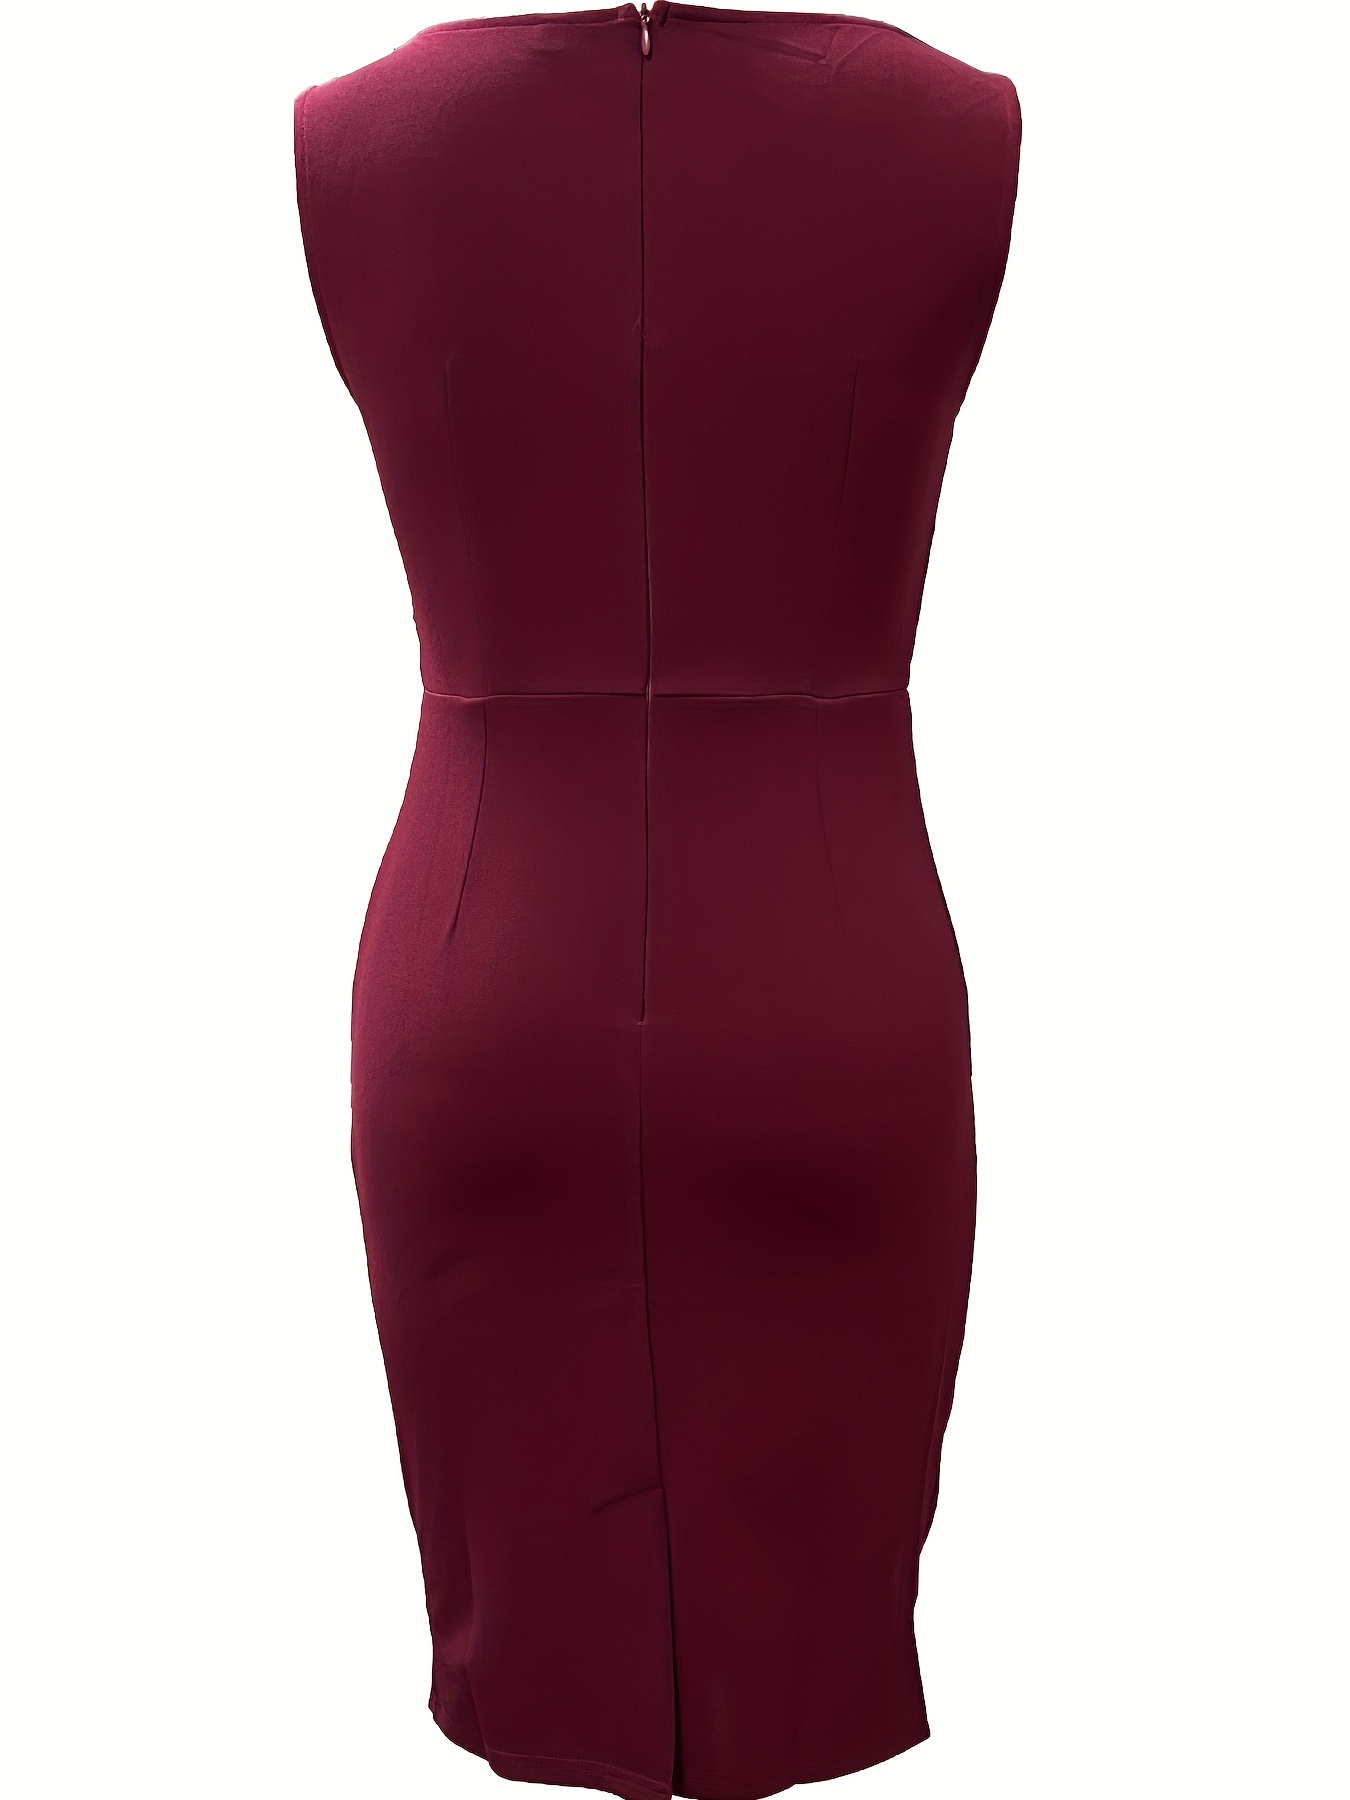 ruched pencil dress elegant crew neck sleeveless work office dress womens clothing details 24